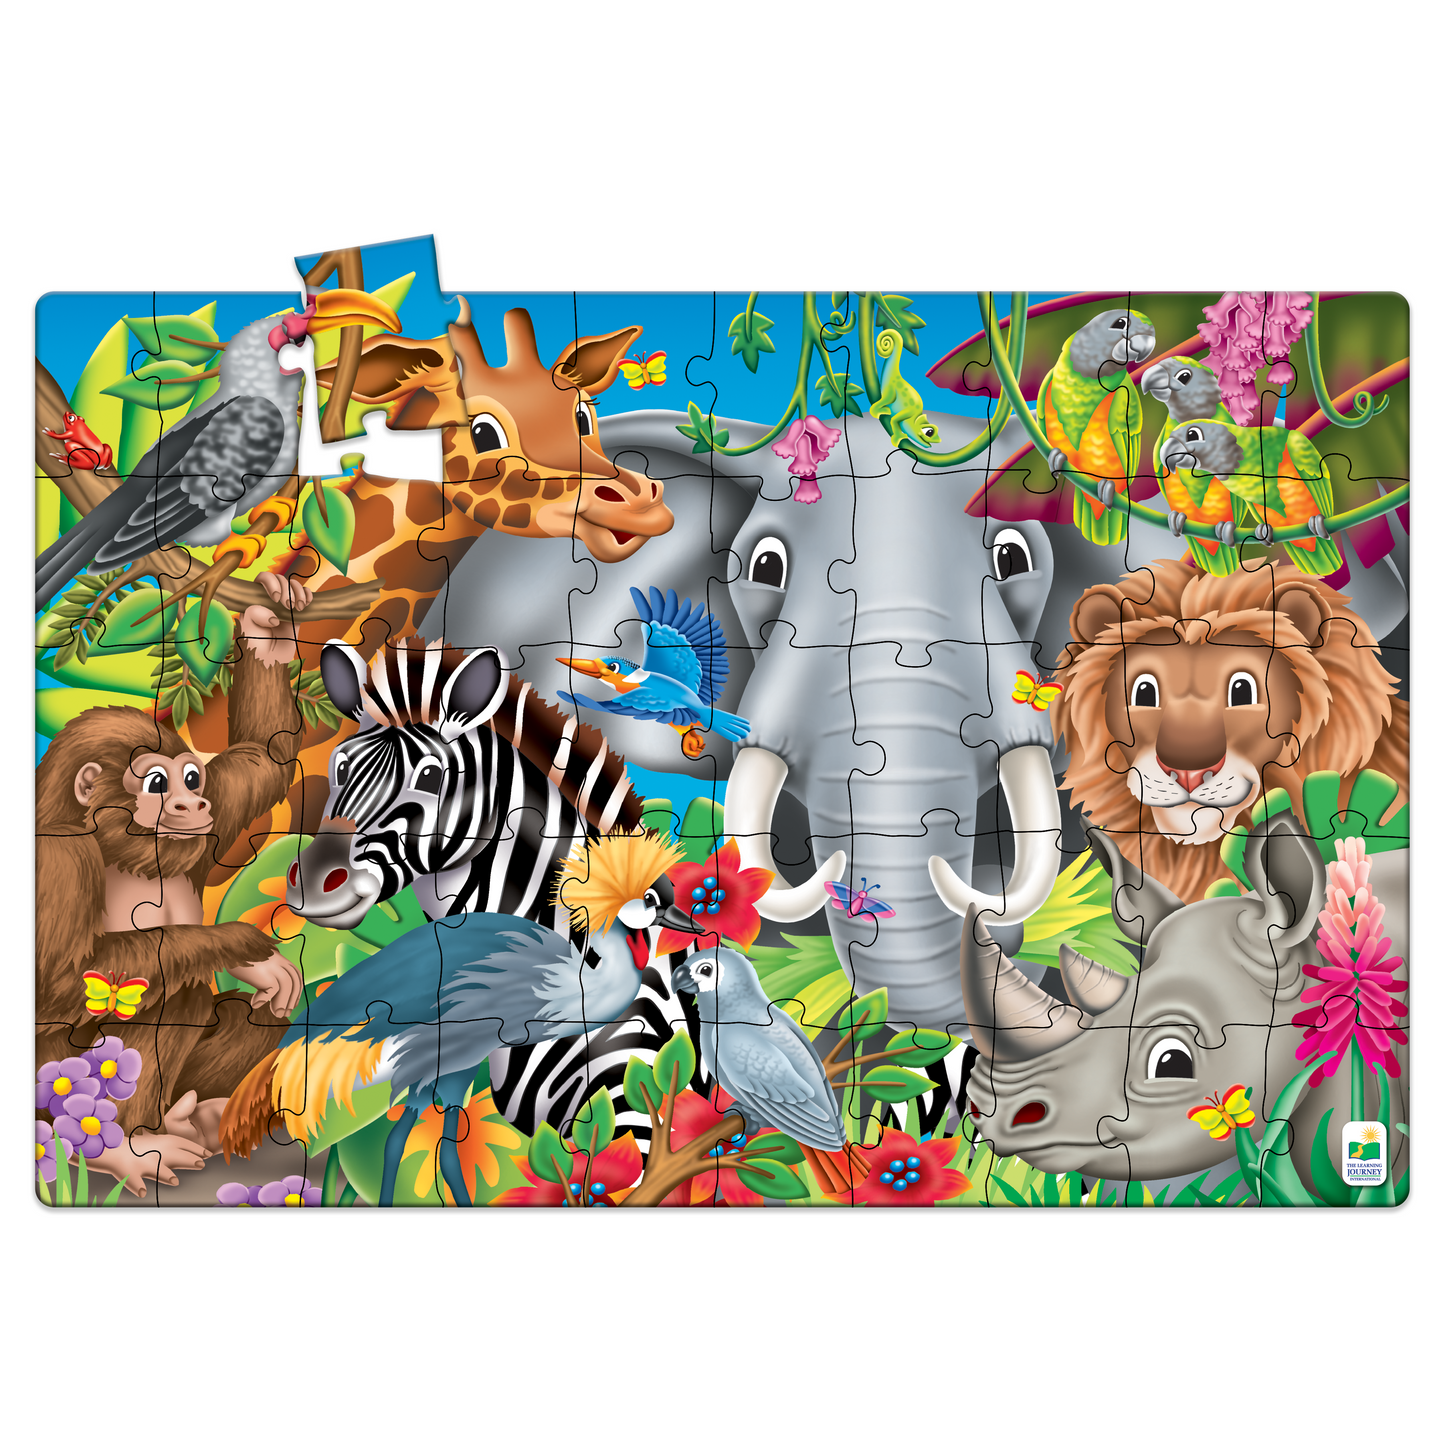 Jumbo Floor Puzzle Animals of the World | Jigsaw Puzzle For Kids